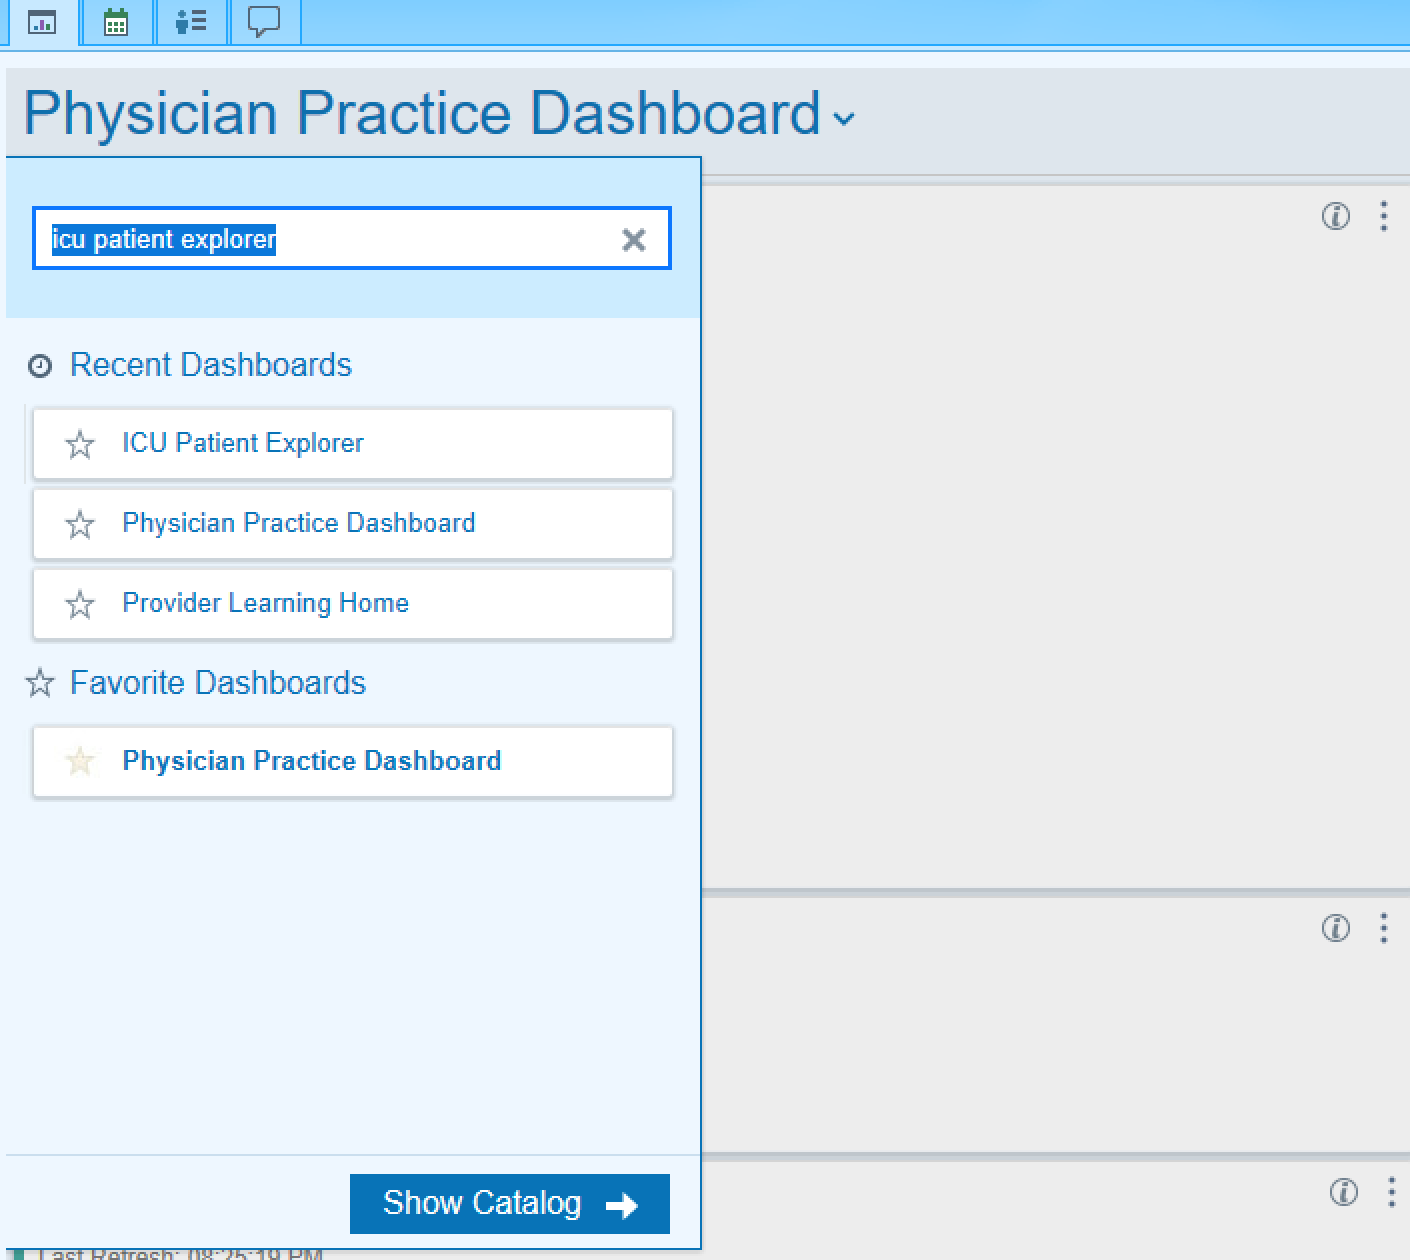 Physician Practice Dashhboard